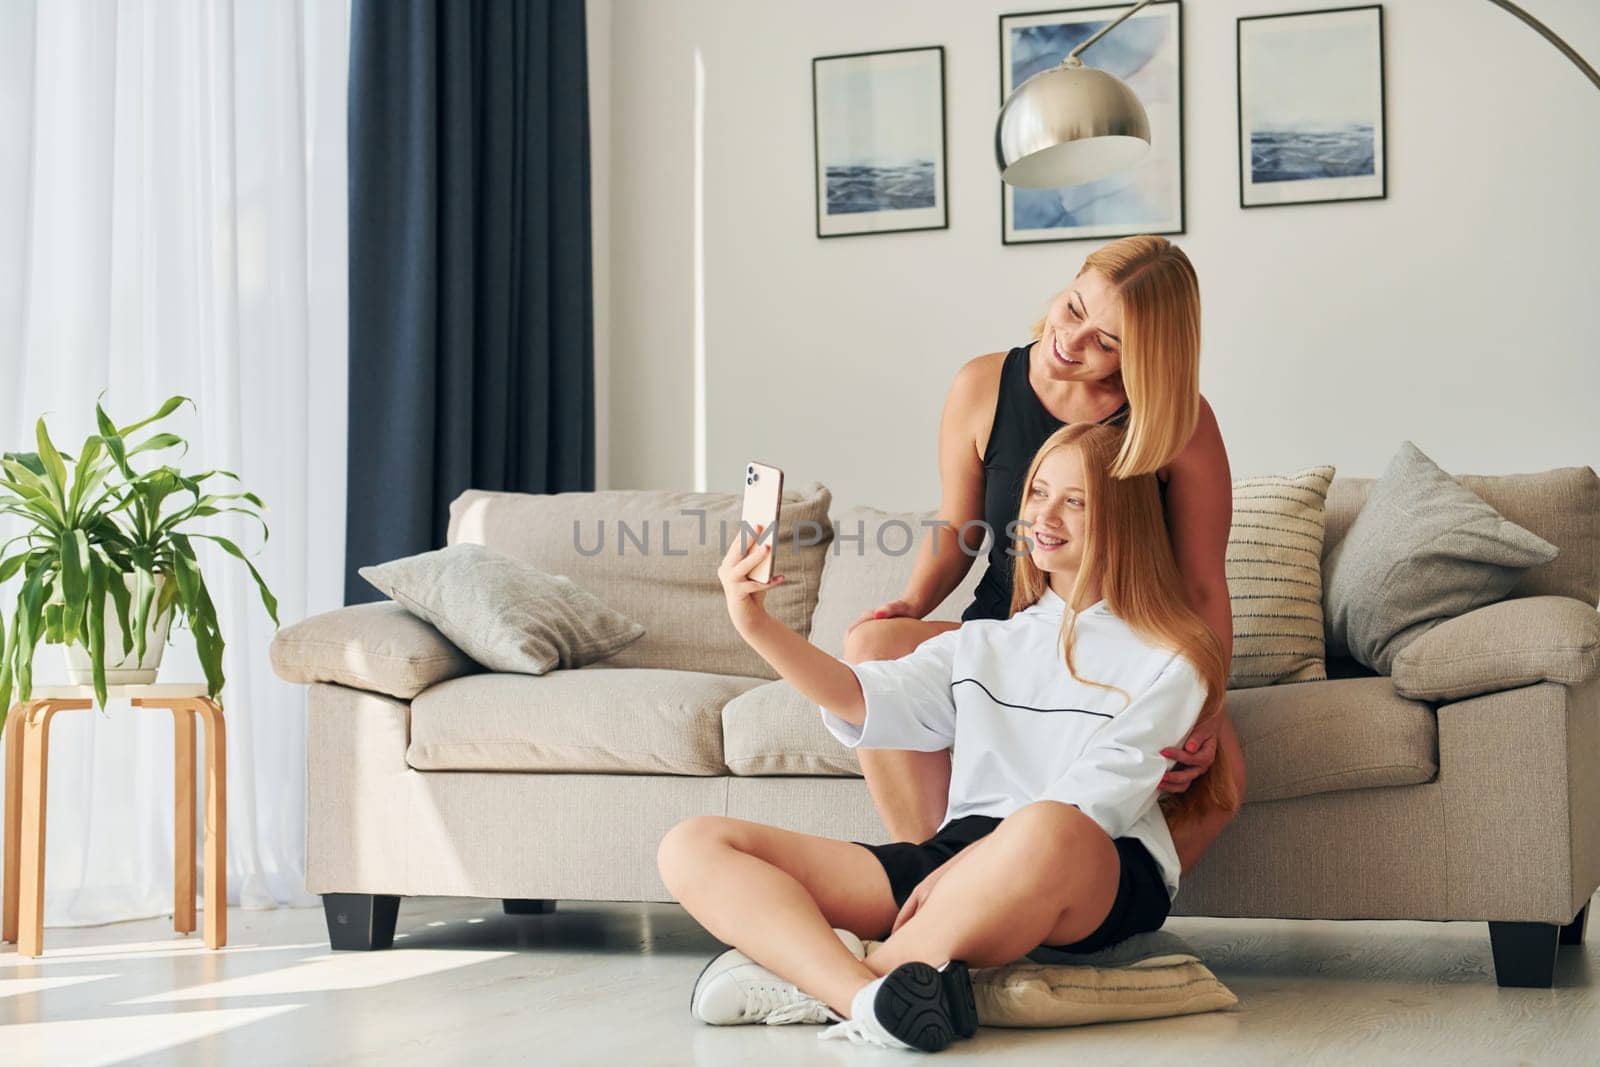 Making selfie. Female teenager with her mother is at home at daytime.